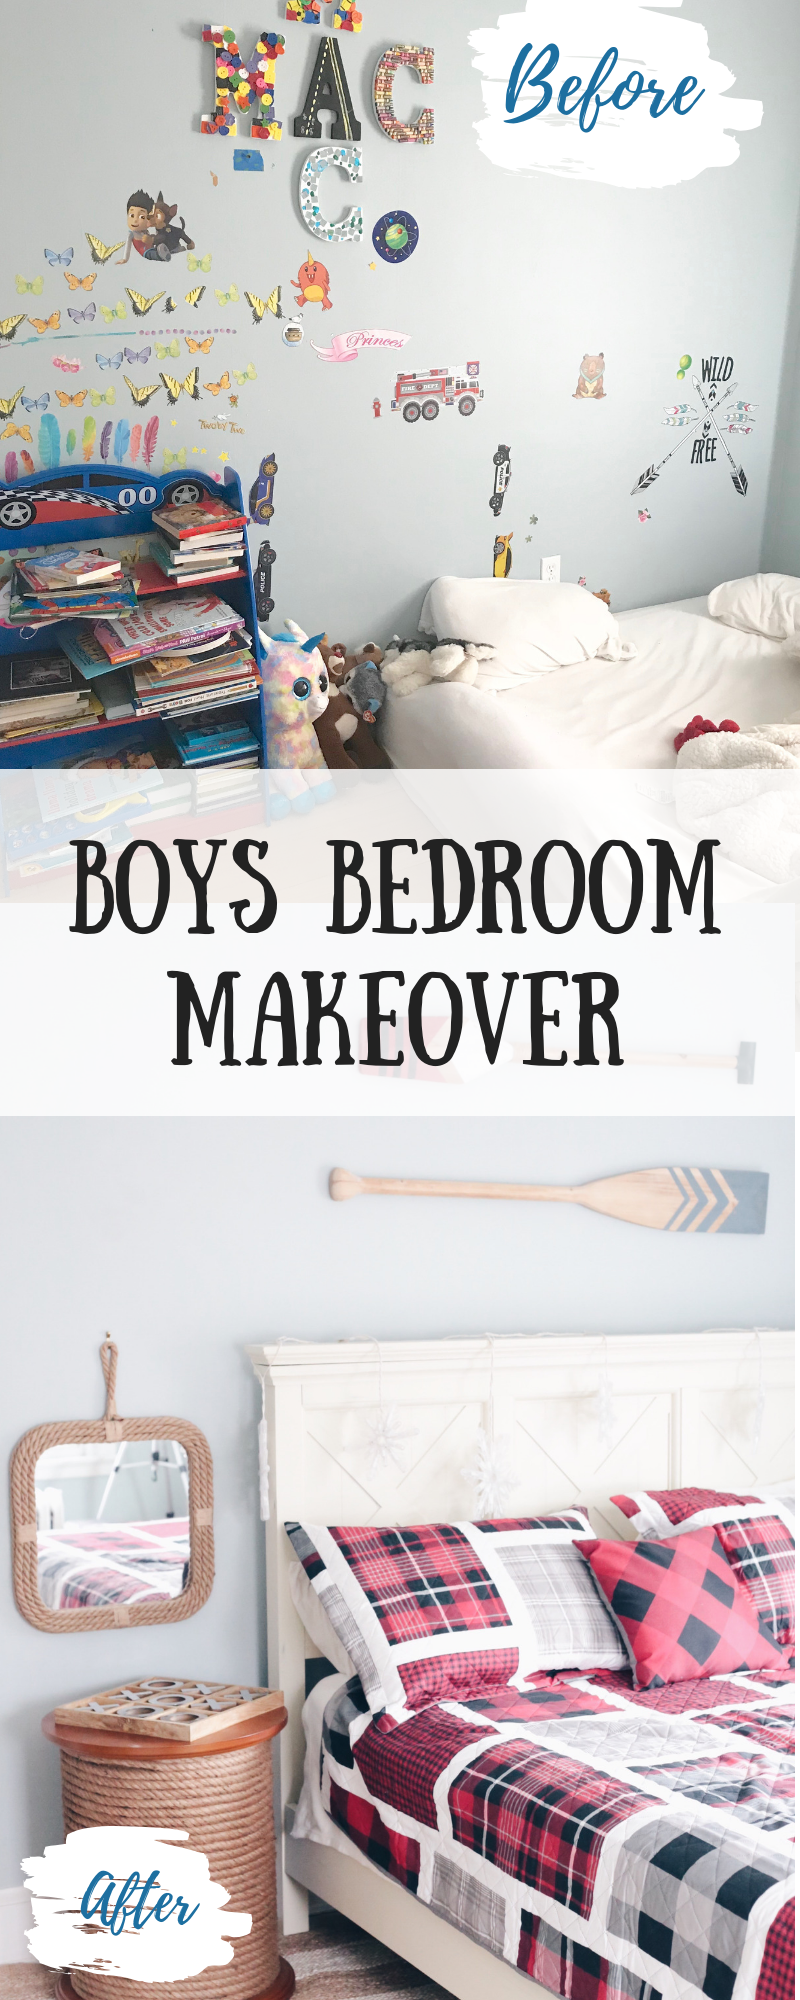 Boys Bedroom ideas - before and after Makeover on Pinteresting Plans blog